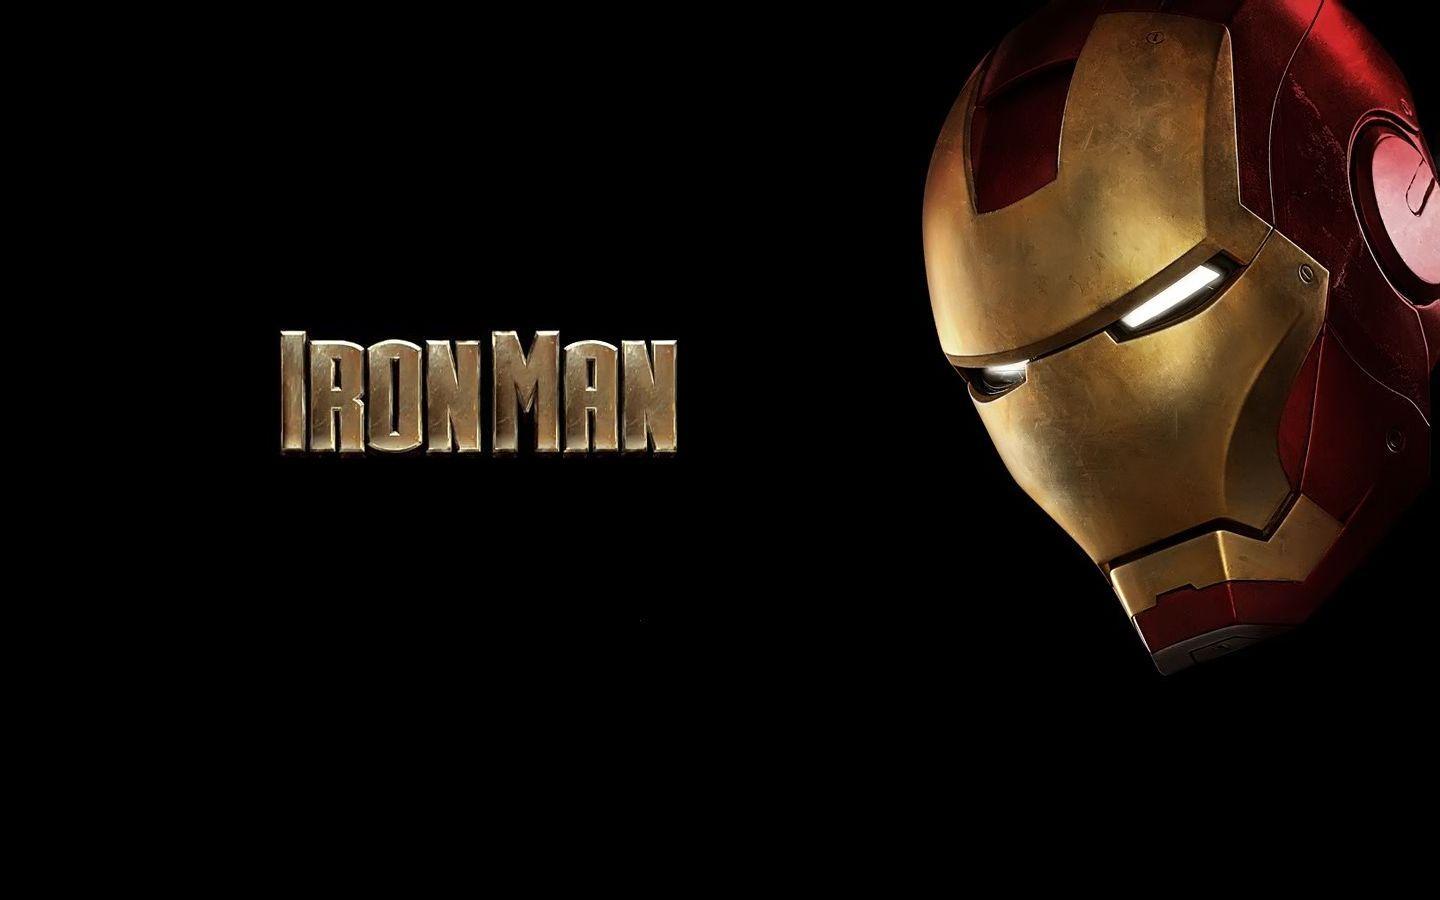 Iron Man 2 Wallpapers Image & Pictures